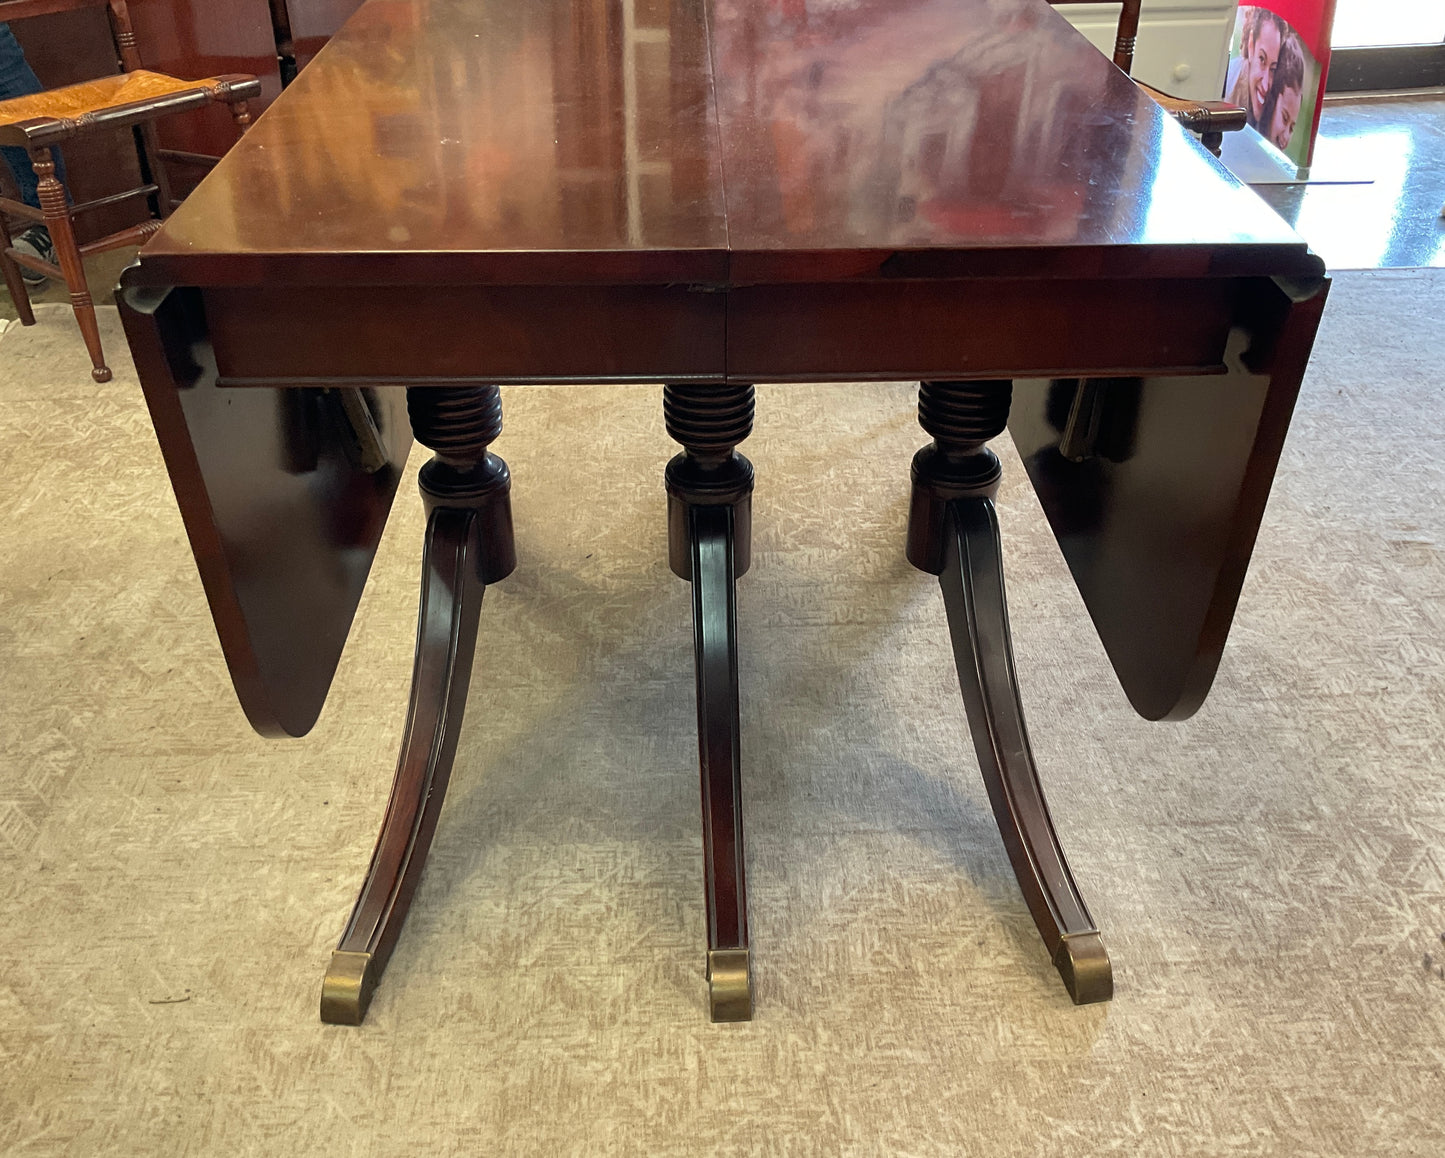 Federal Style White Furniture Co. Extendable Dining Table W/ 6 Tell City Chairs **AT OUR 1ST STREET LOCATION**